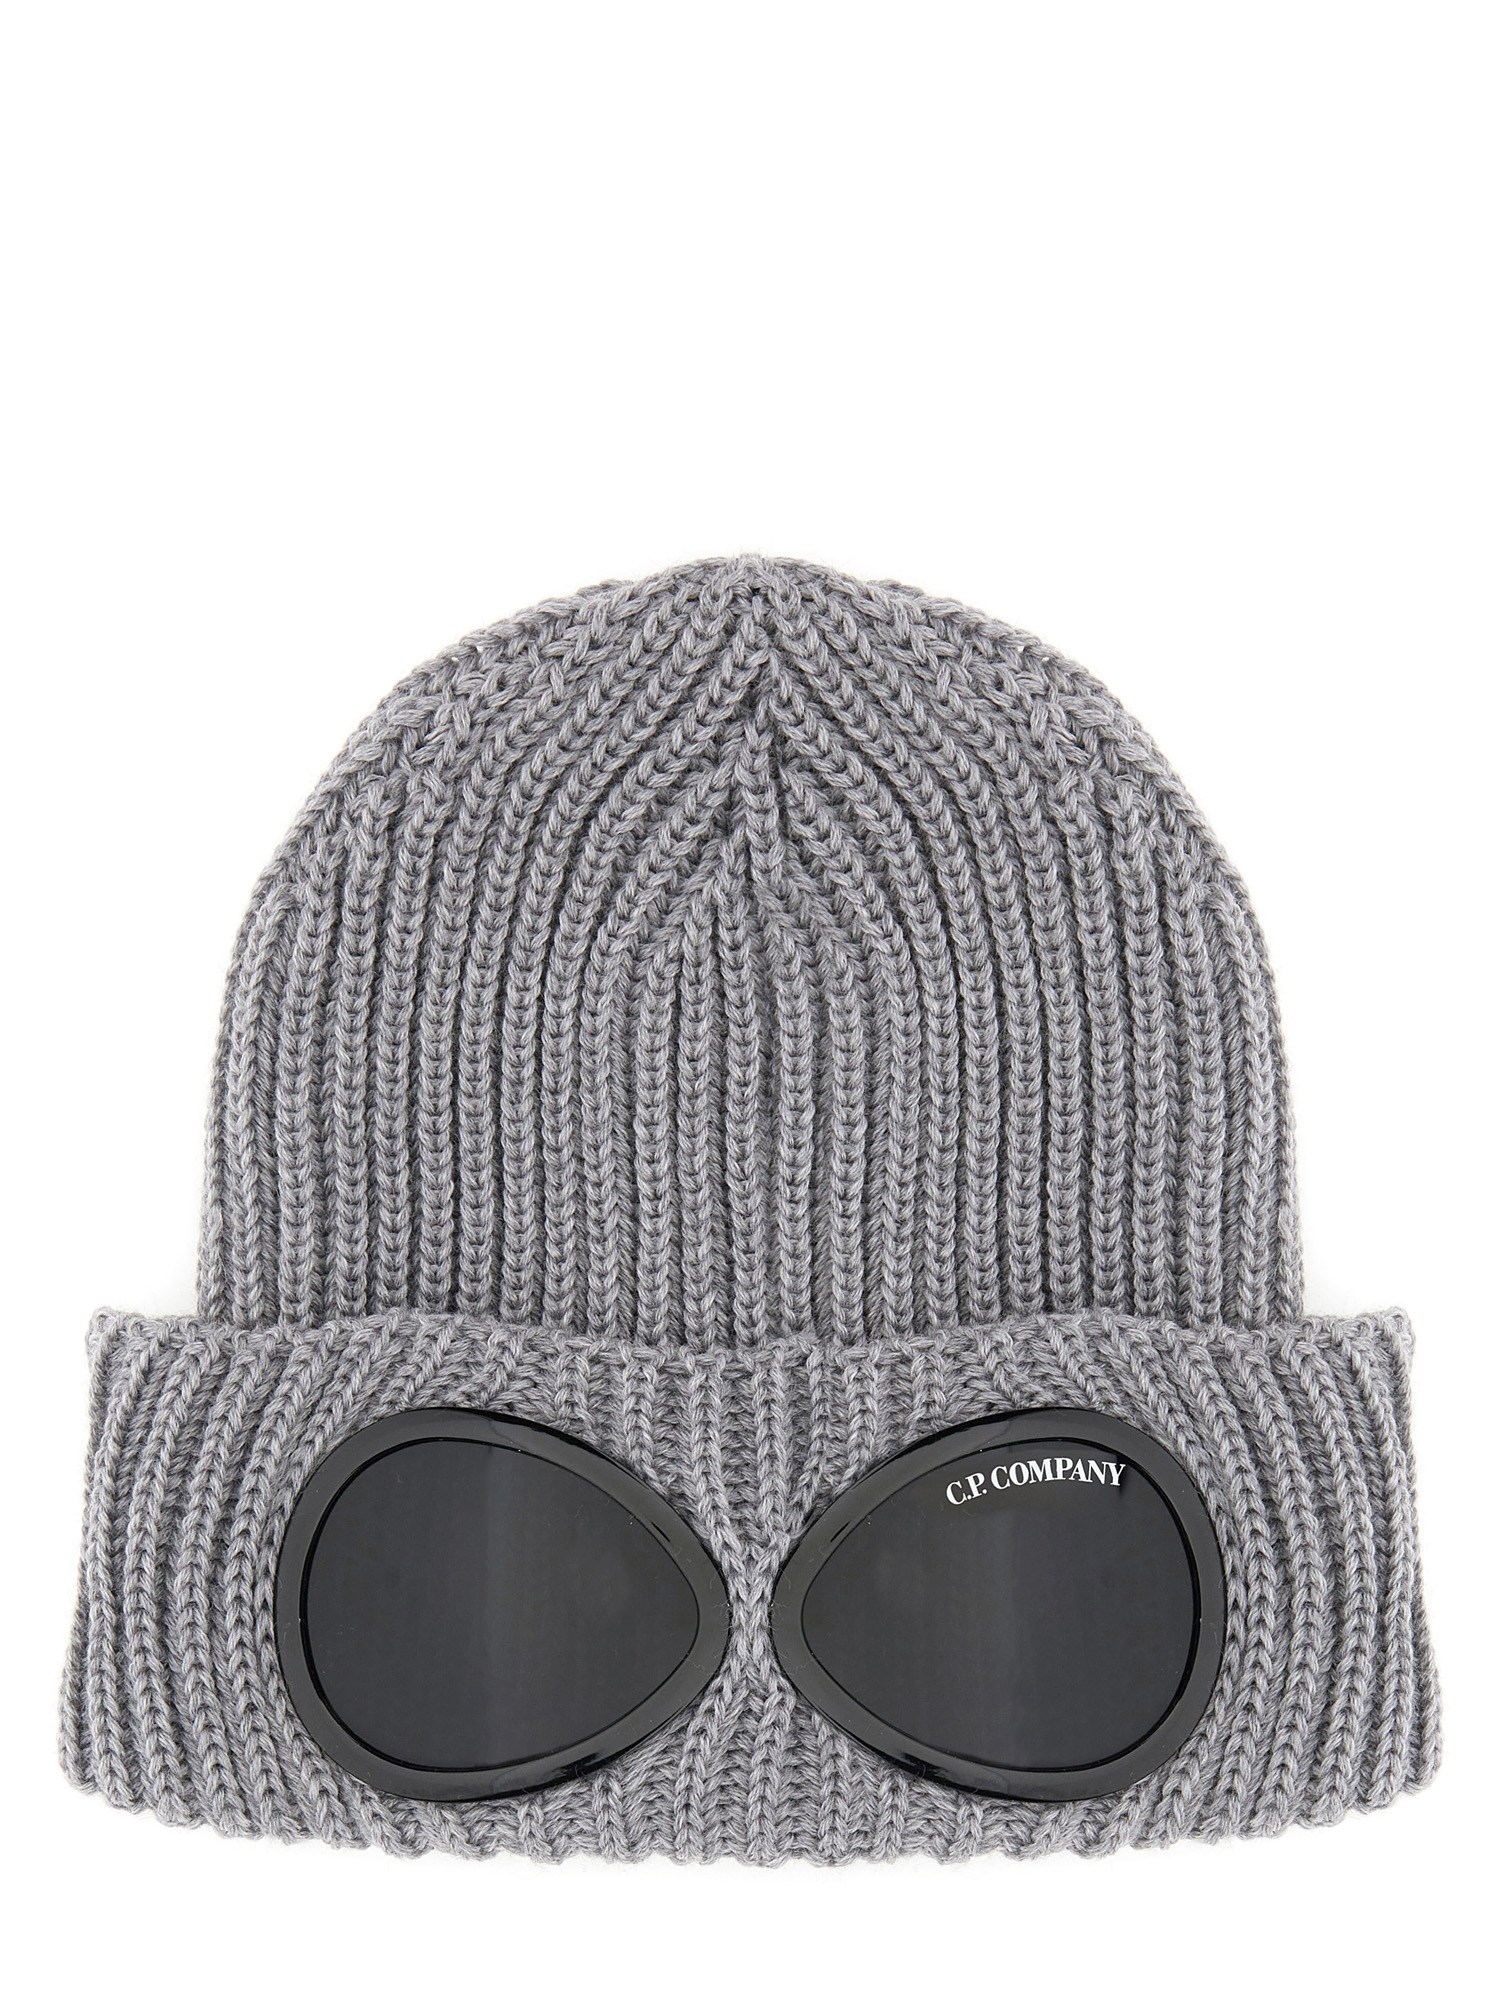 c.p. company knit hat with goggle